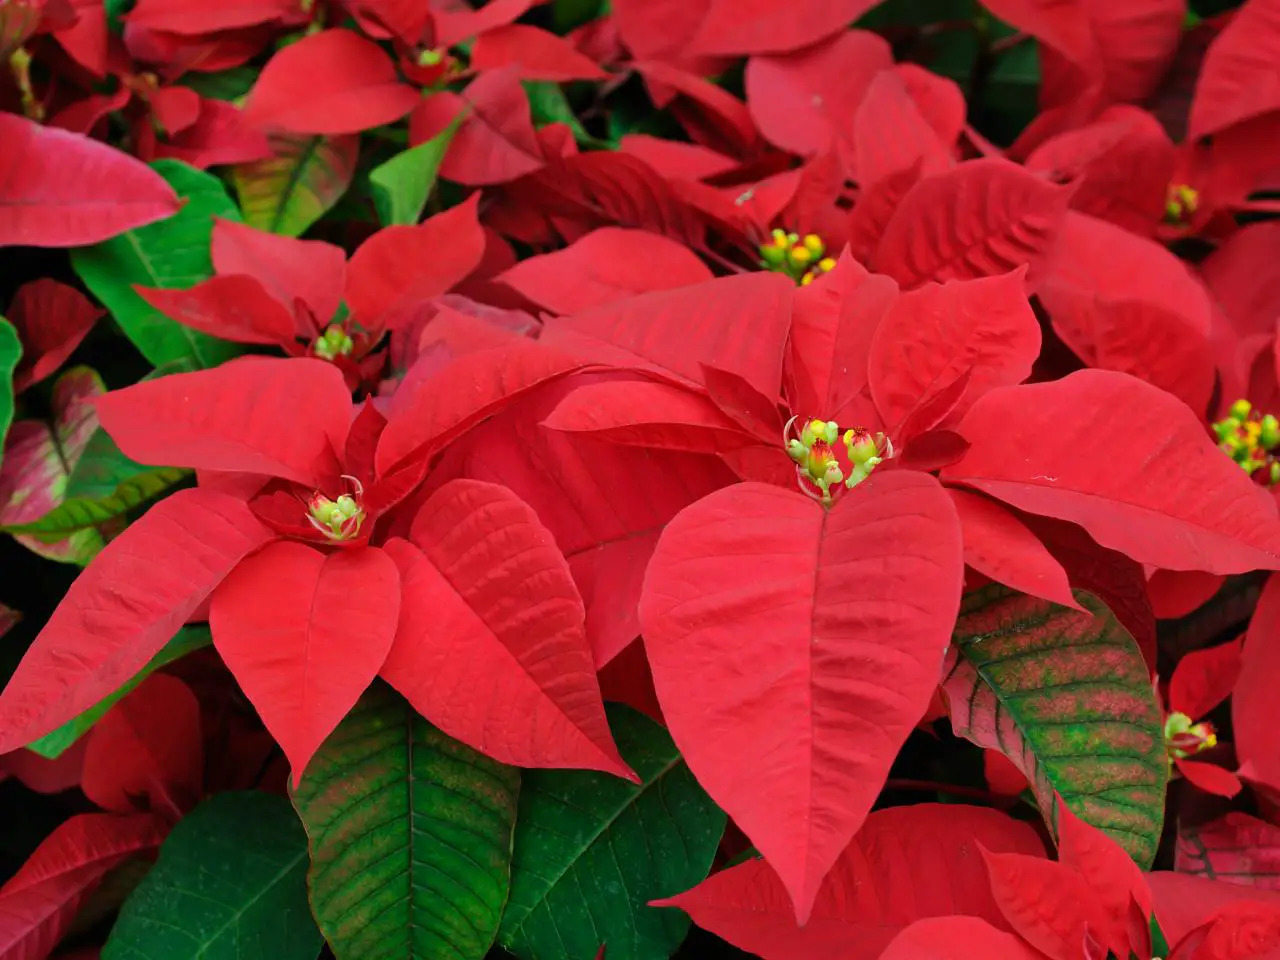 1 What Are The Common Uses Of Poinsettia?